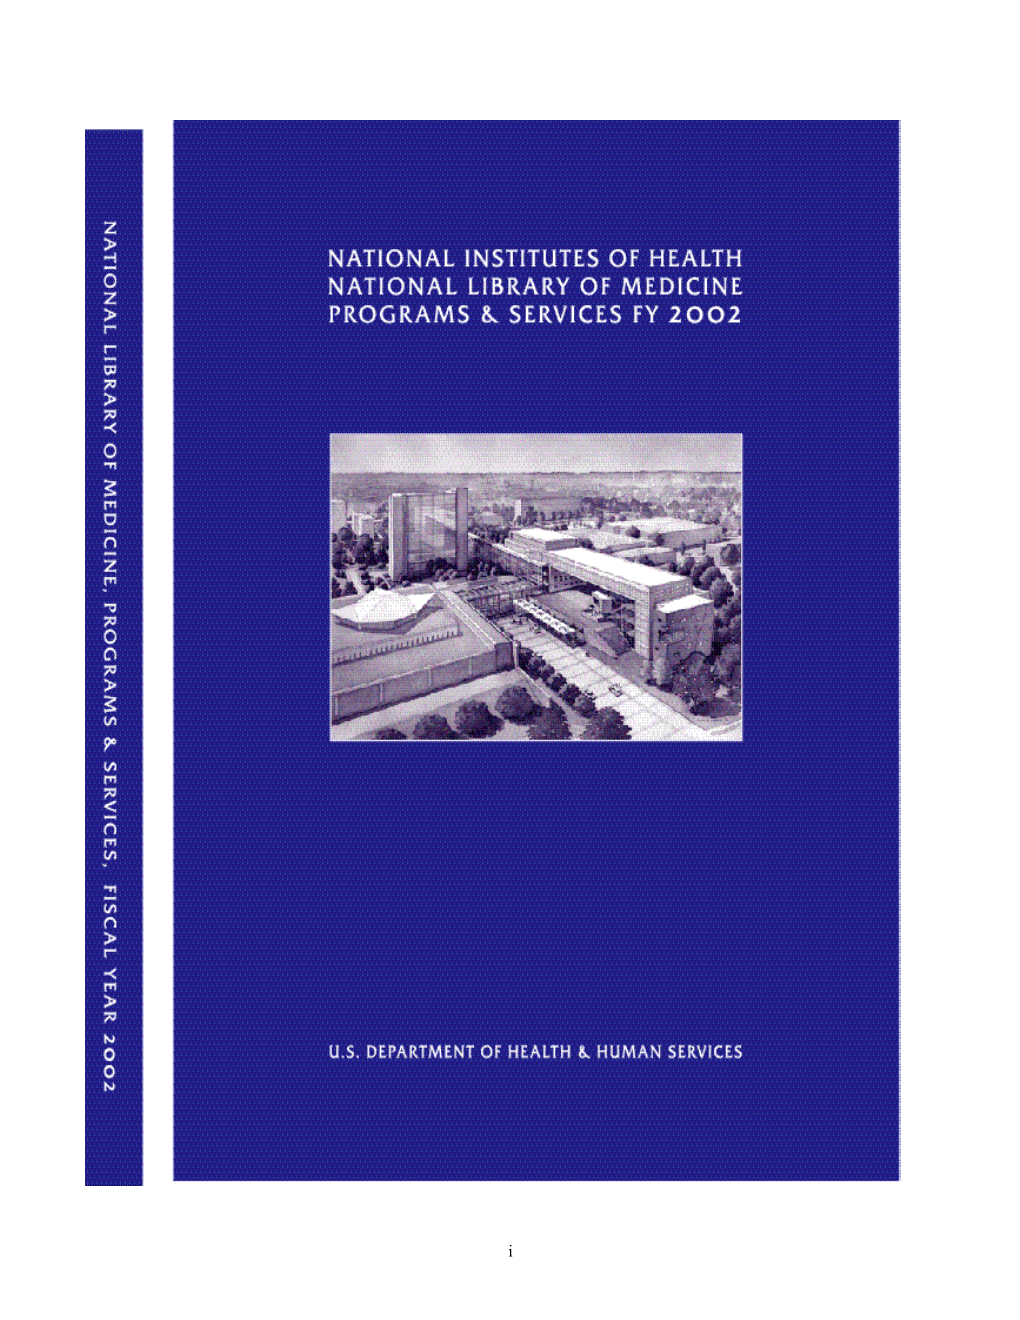 Programs and Services, Fiscal Year 2002